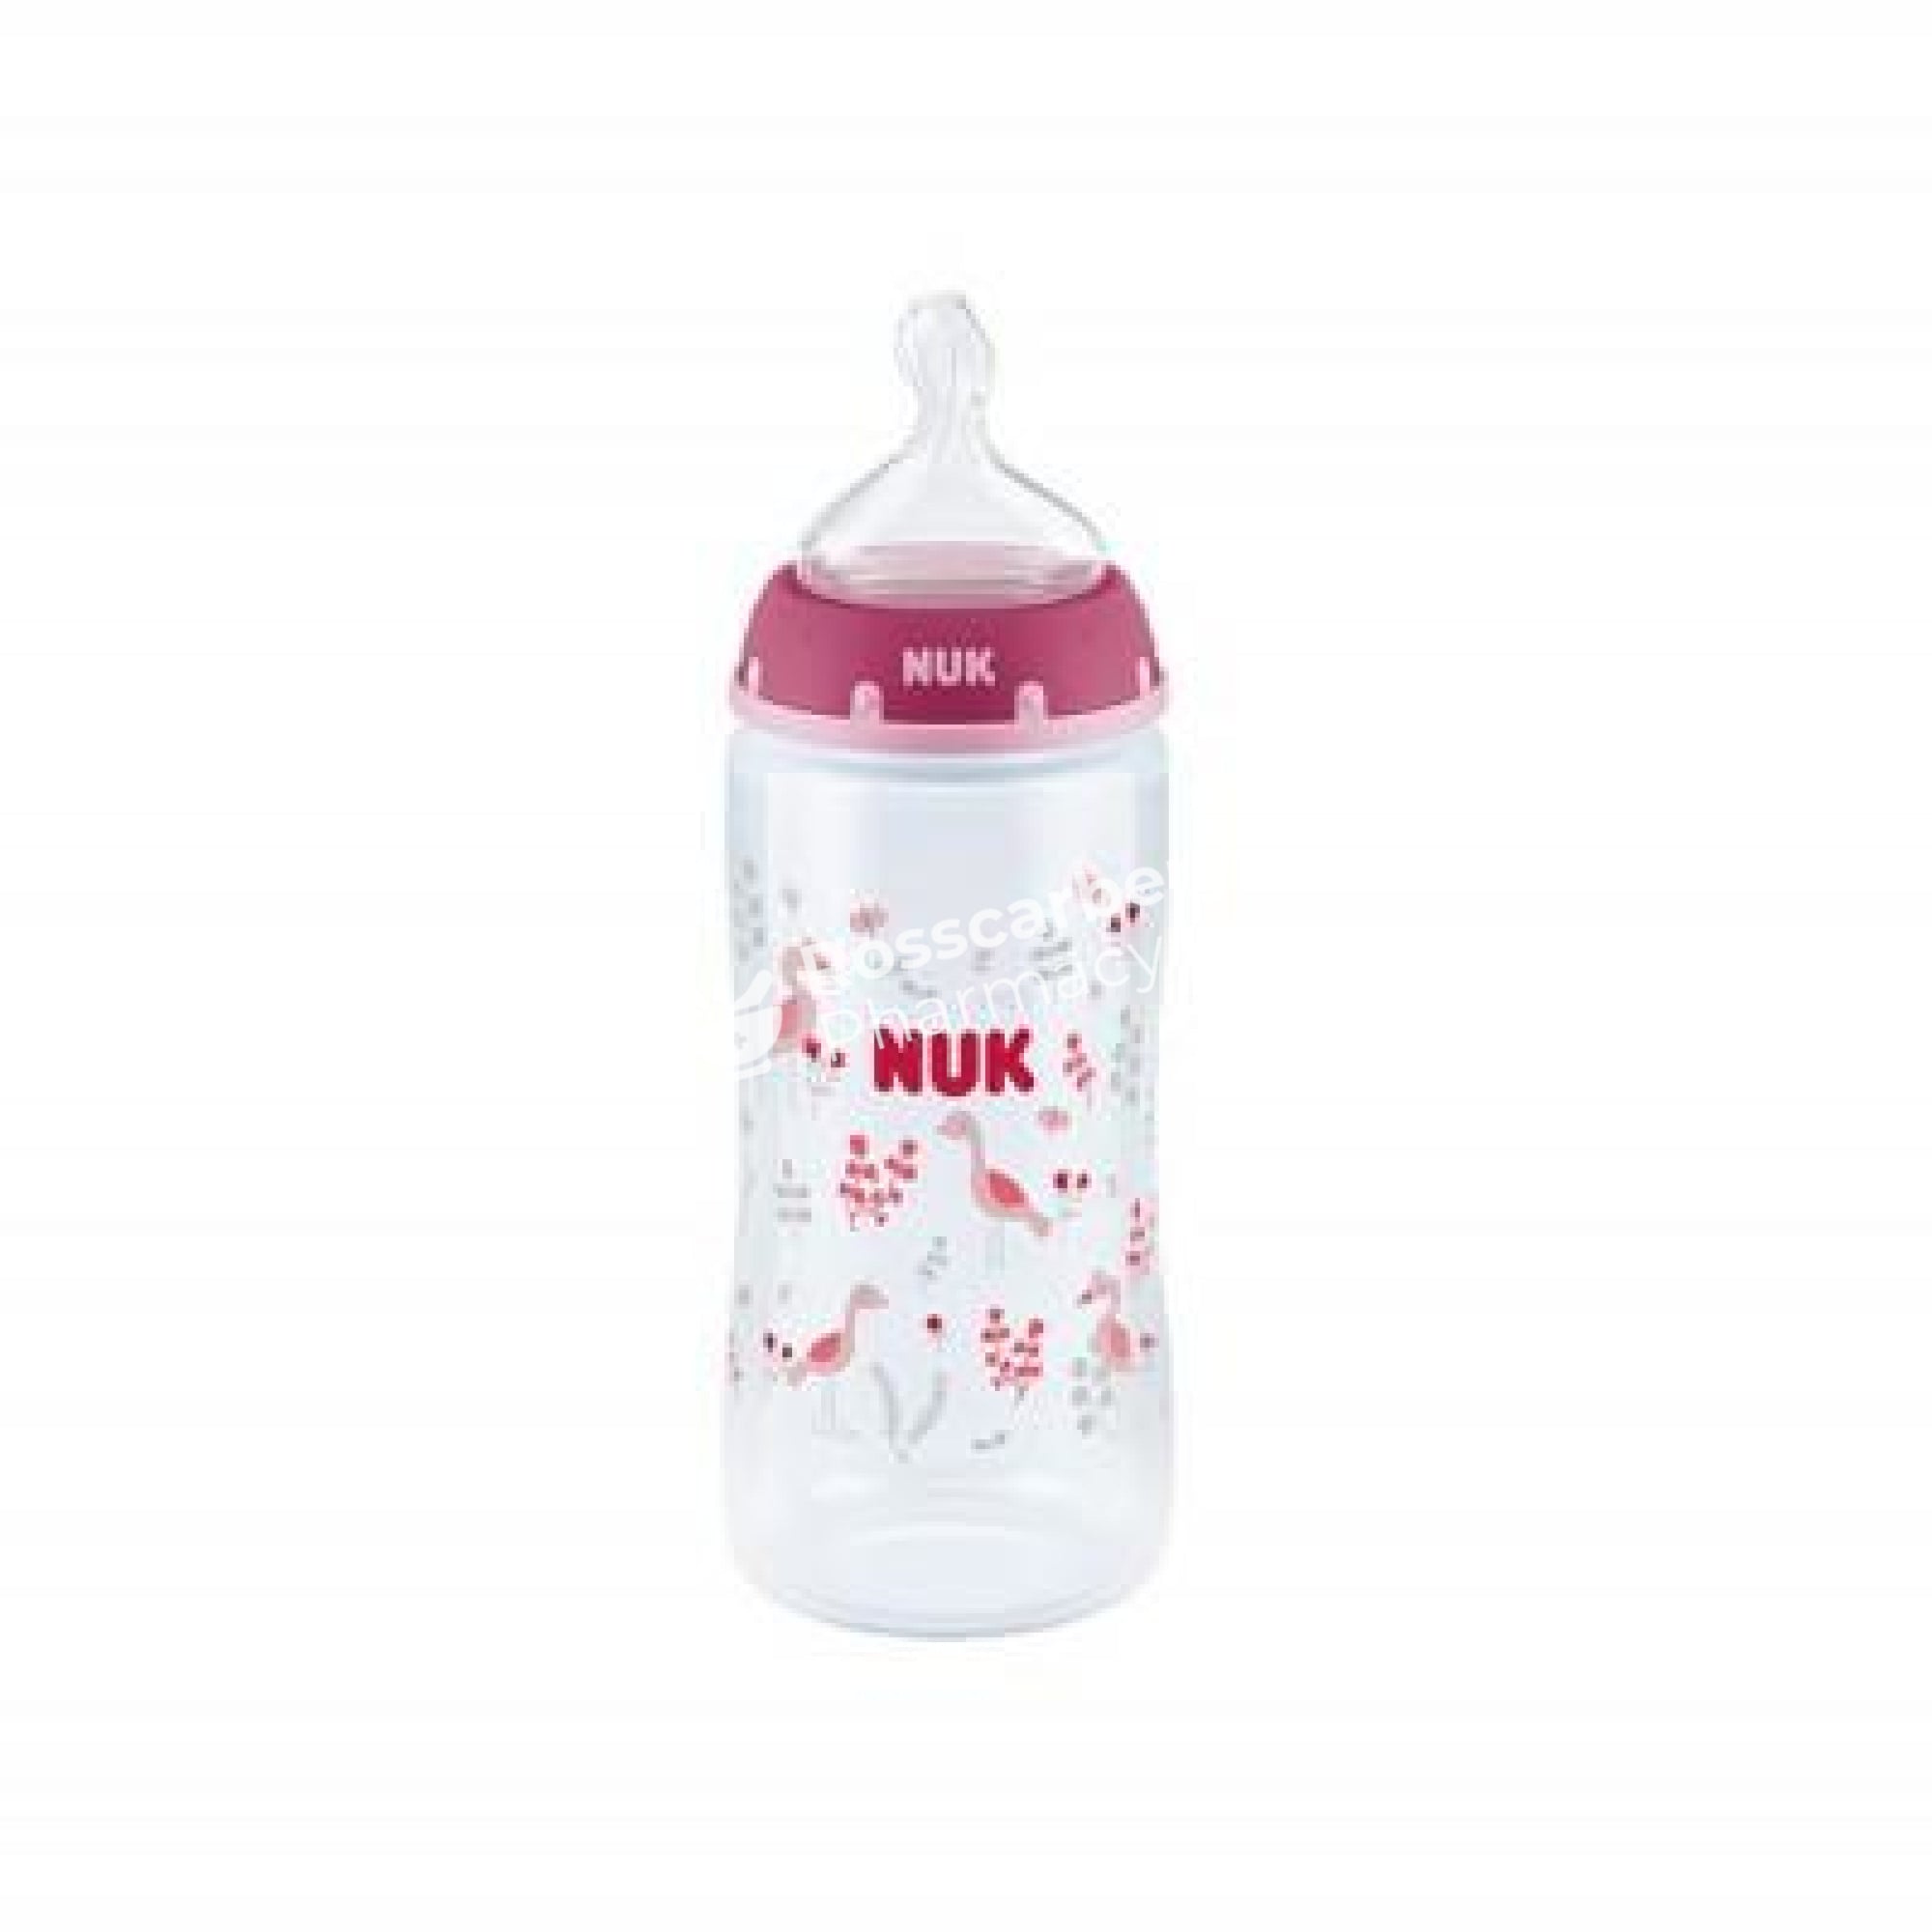 Nuk First Choice+ Silicone Bottle 0-6 Months Baby Bottles